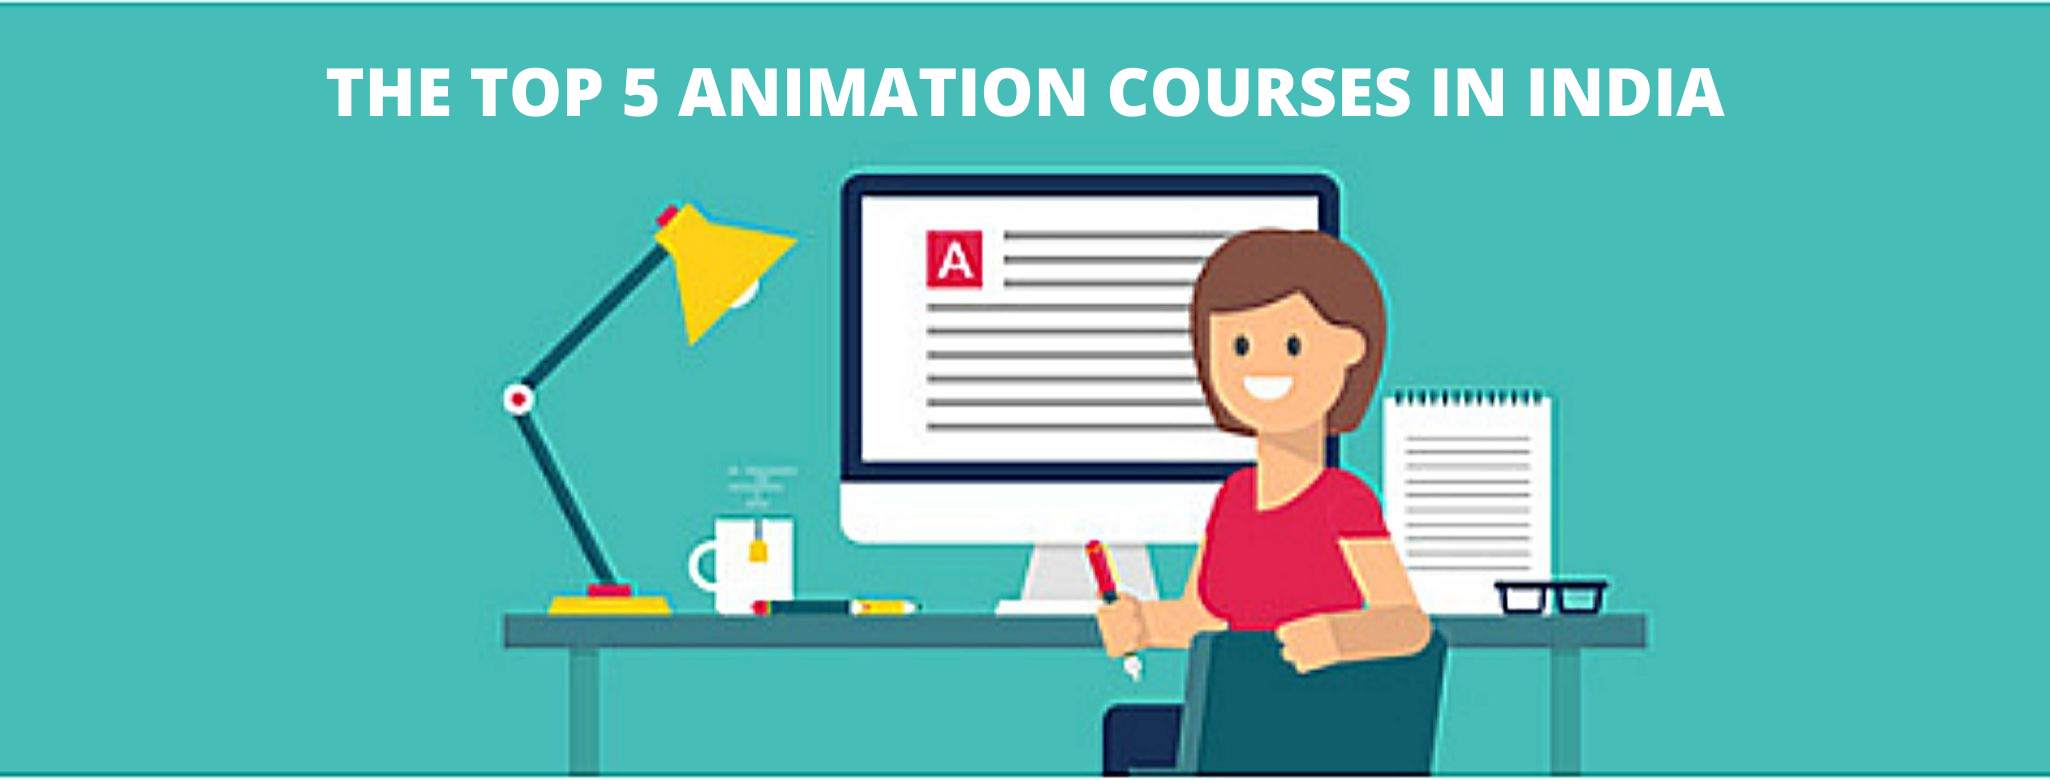 The Top 5 Animation Courses In India (Updated) - IIM SKILLS